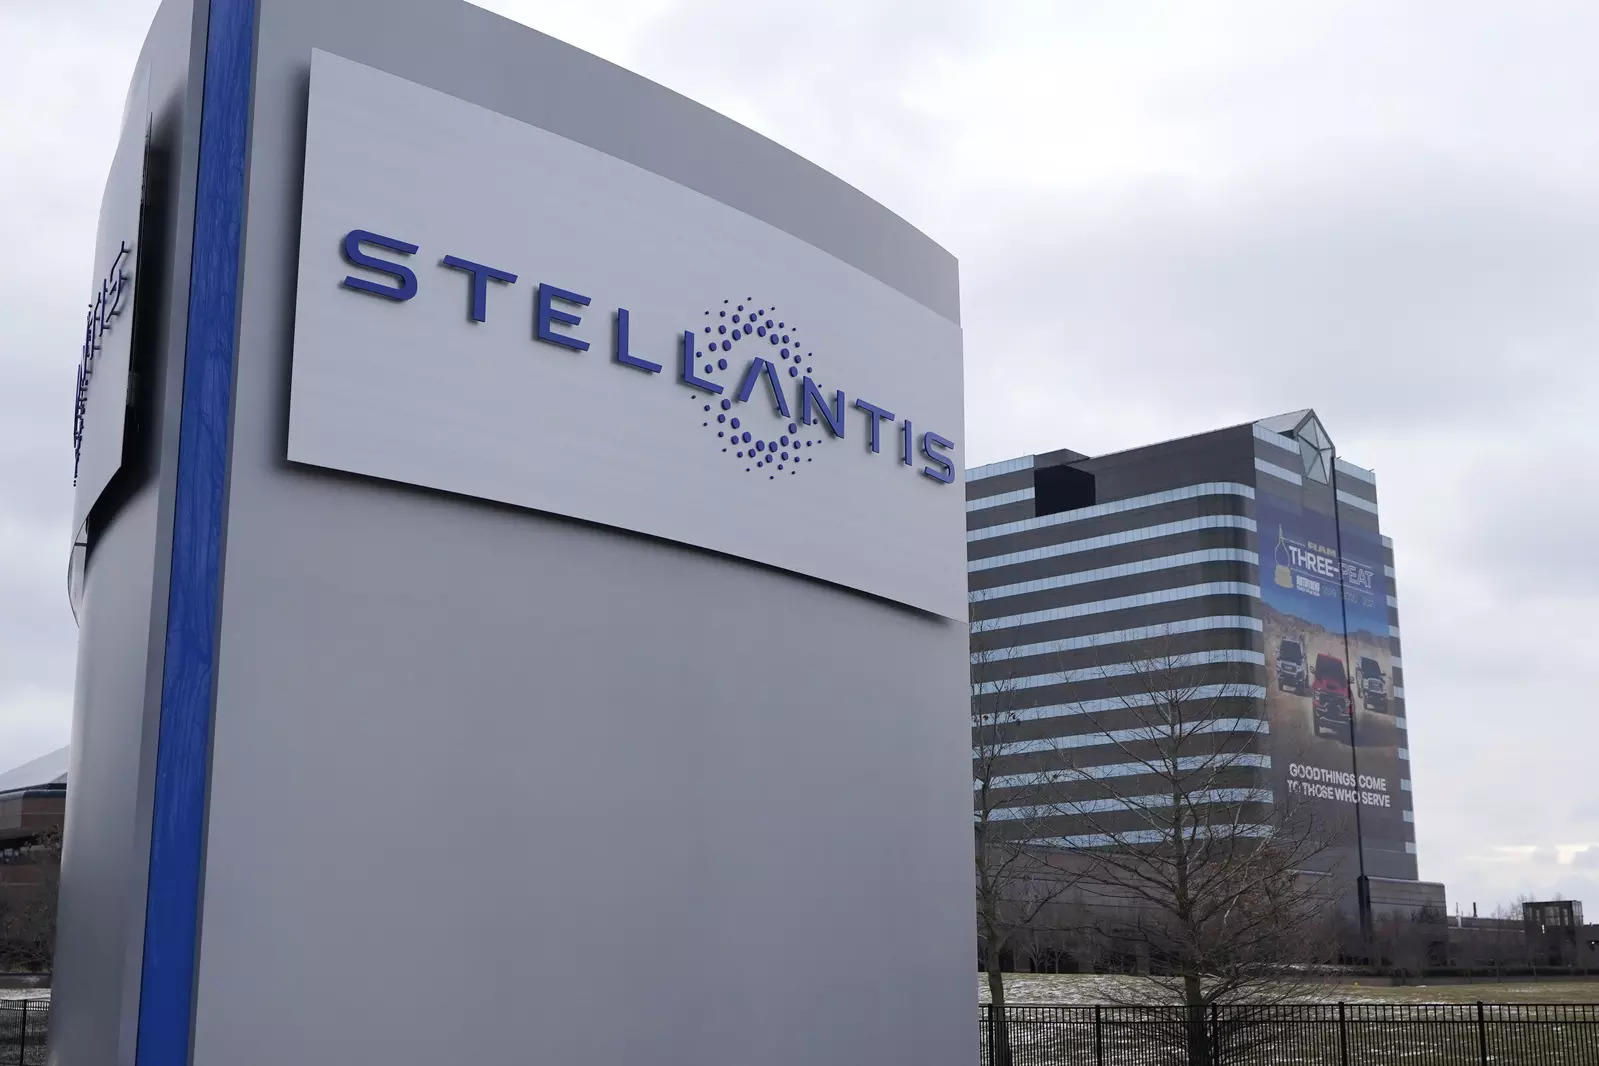 Stellantis arm partners with Free2move to leverage vehicle embedded telematics data